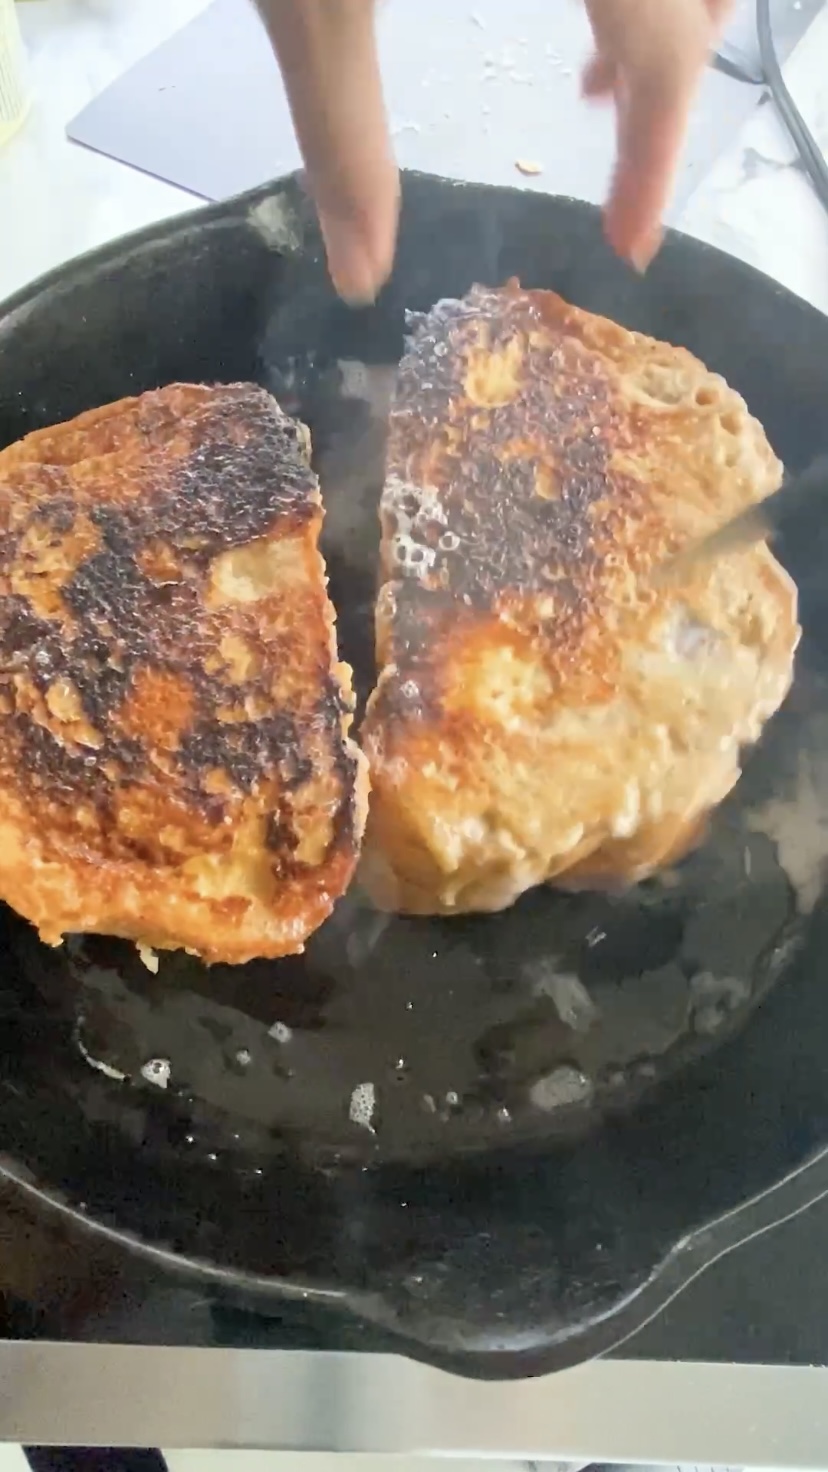 Frying french toast sandwiches in a cast iron skillet.